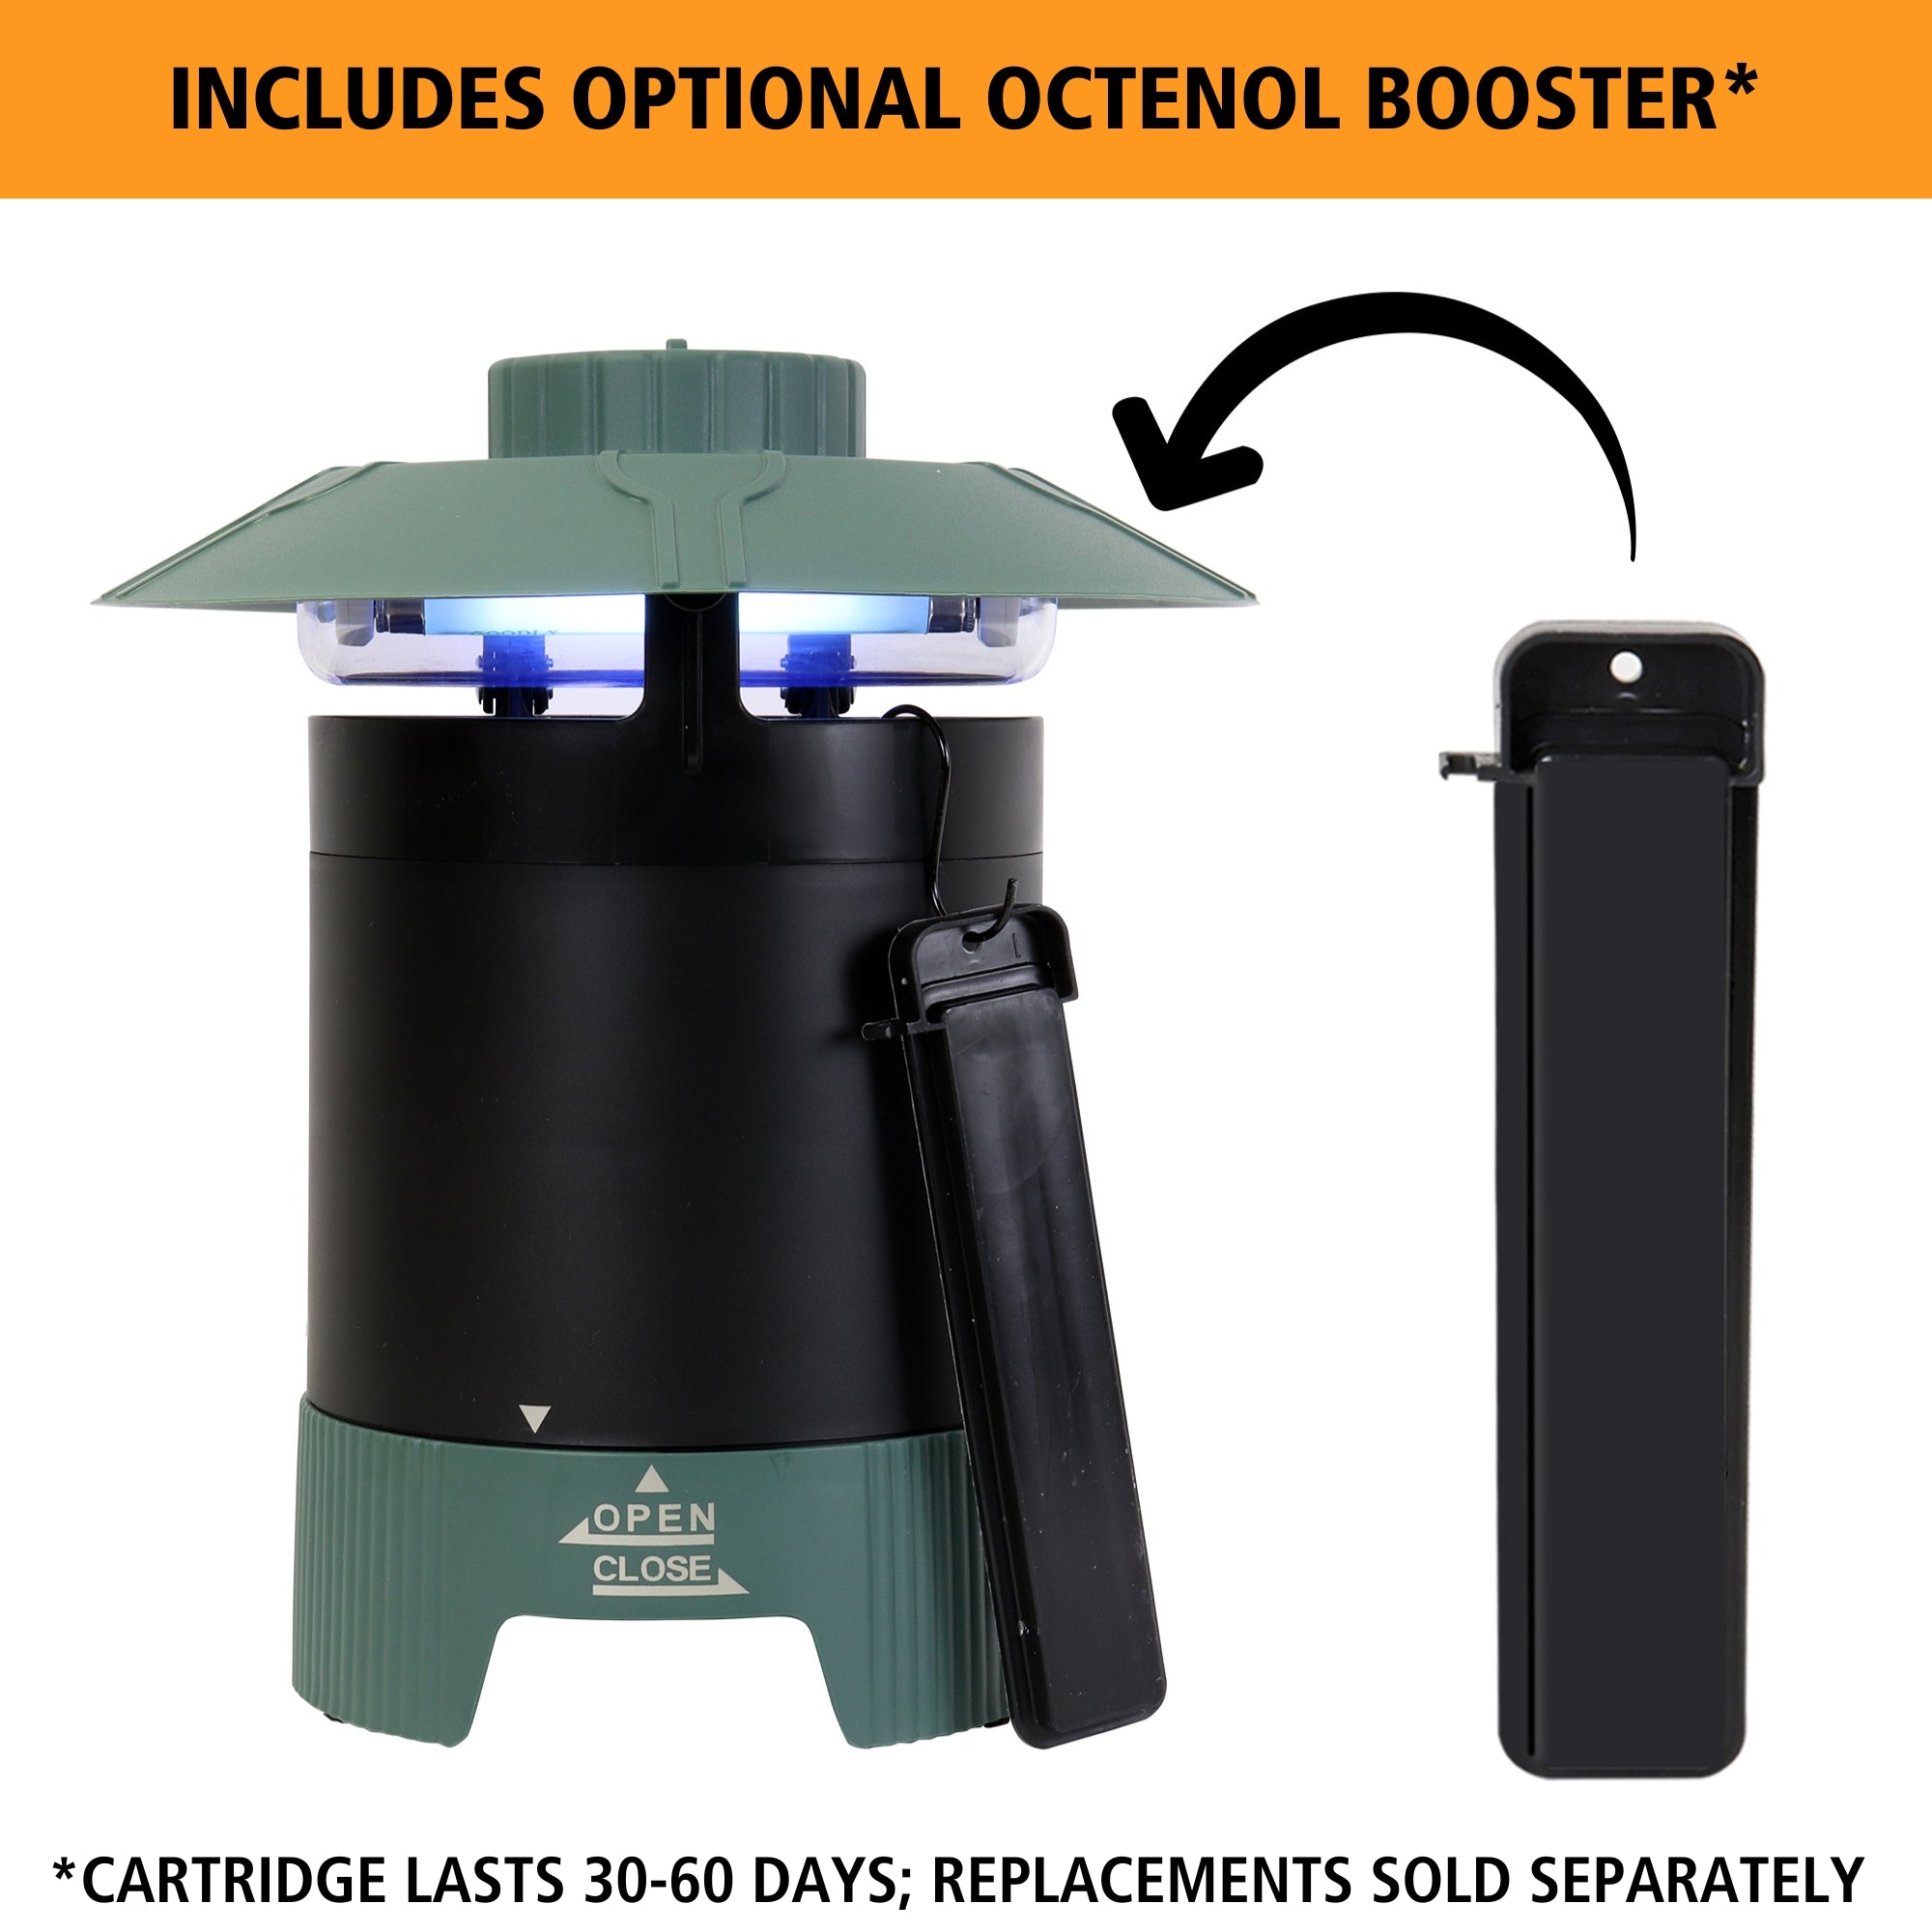 Bite Shield Protector 1/4 acre mosquito trap on the left with an optional Octenol cartridge attached and a replacement cartridge to the right. Text above reads, "Includes optional Octenol booster," and text below reads, "Cartridge lasts 30-60 days; replacements sold separately."